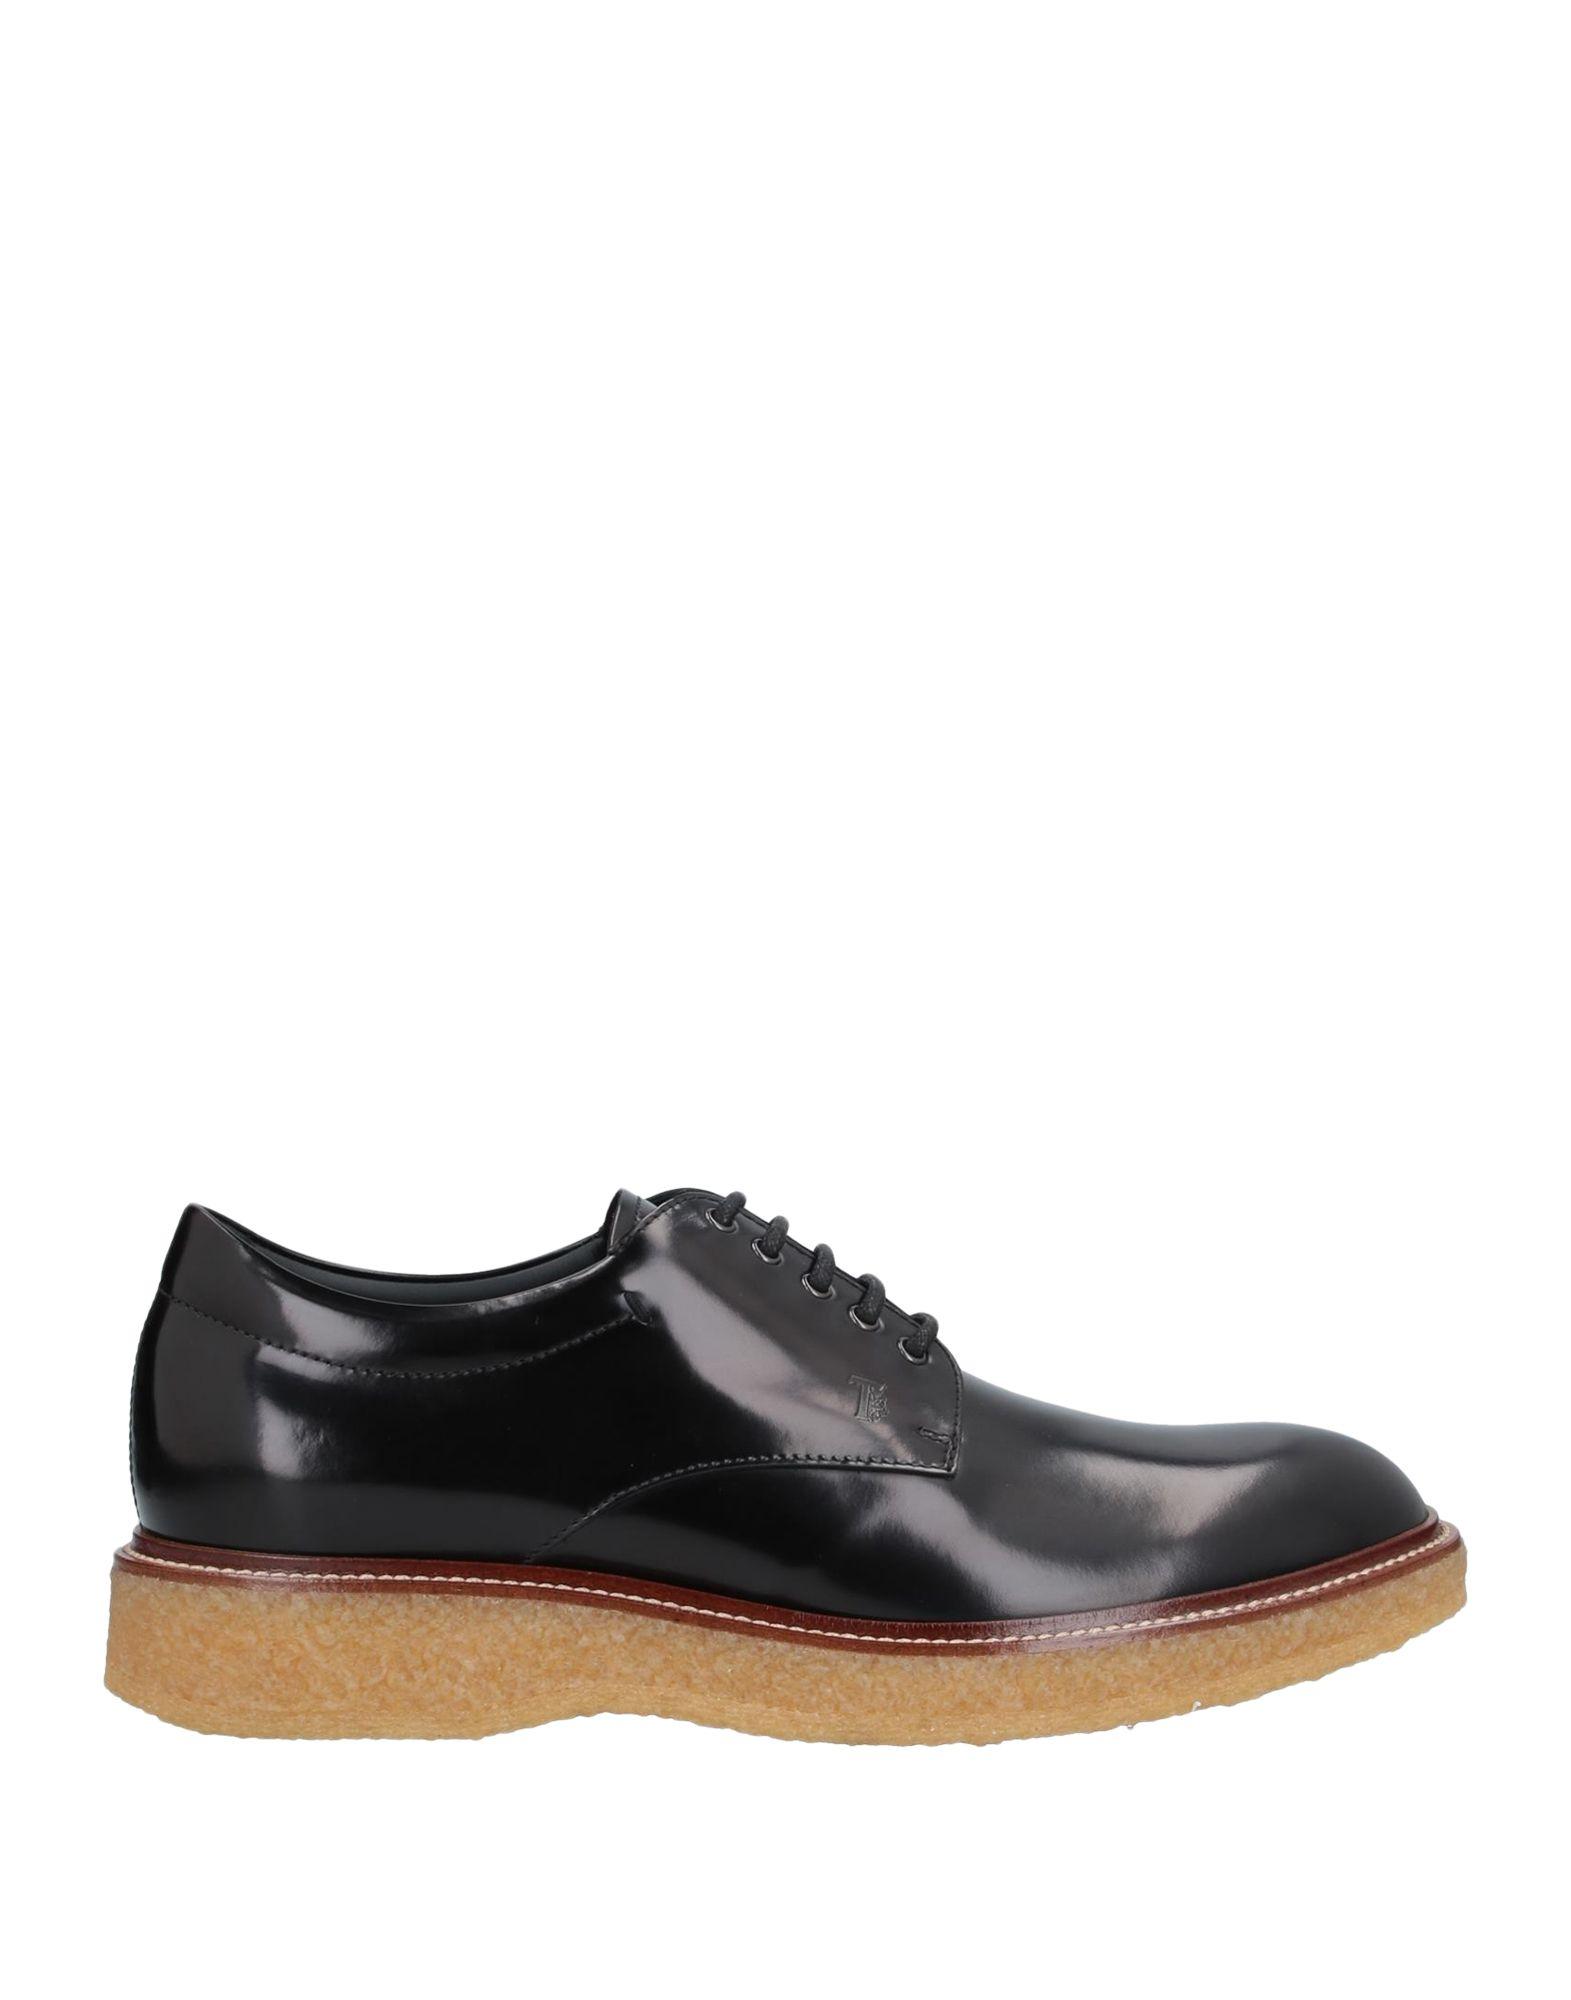 Tod's Rubber Lace-up Shoe in Black for Men - Lyst